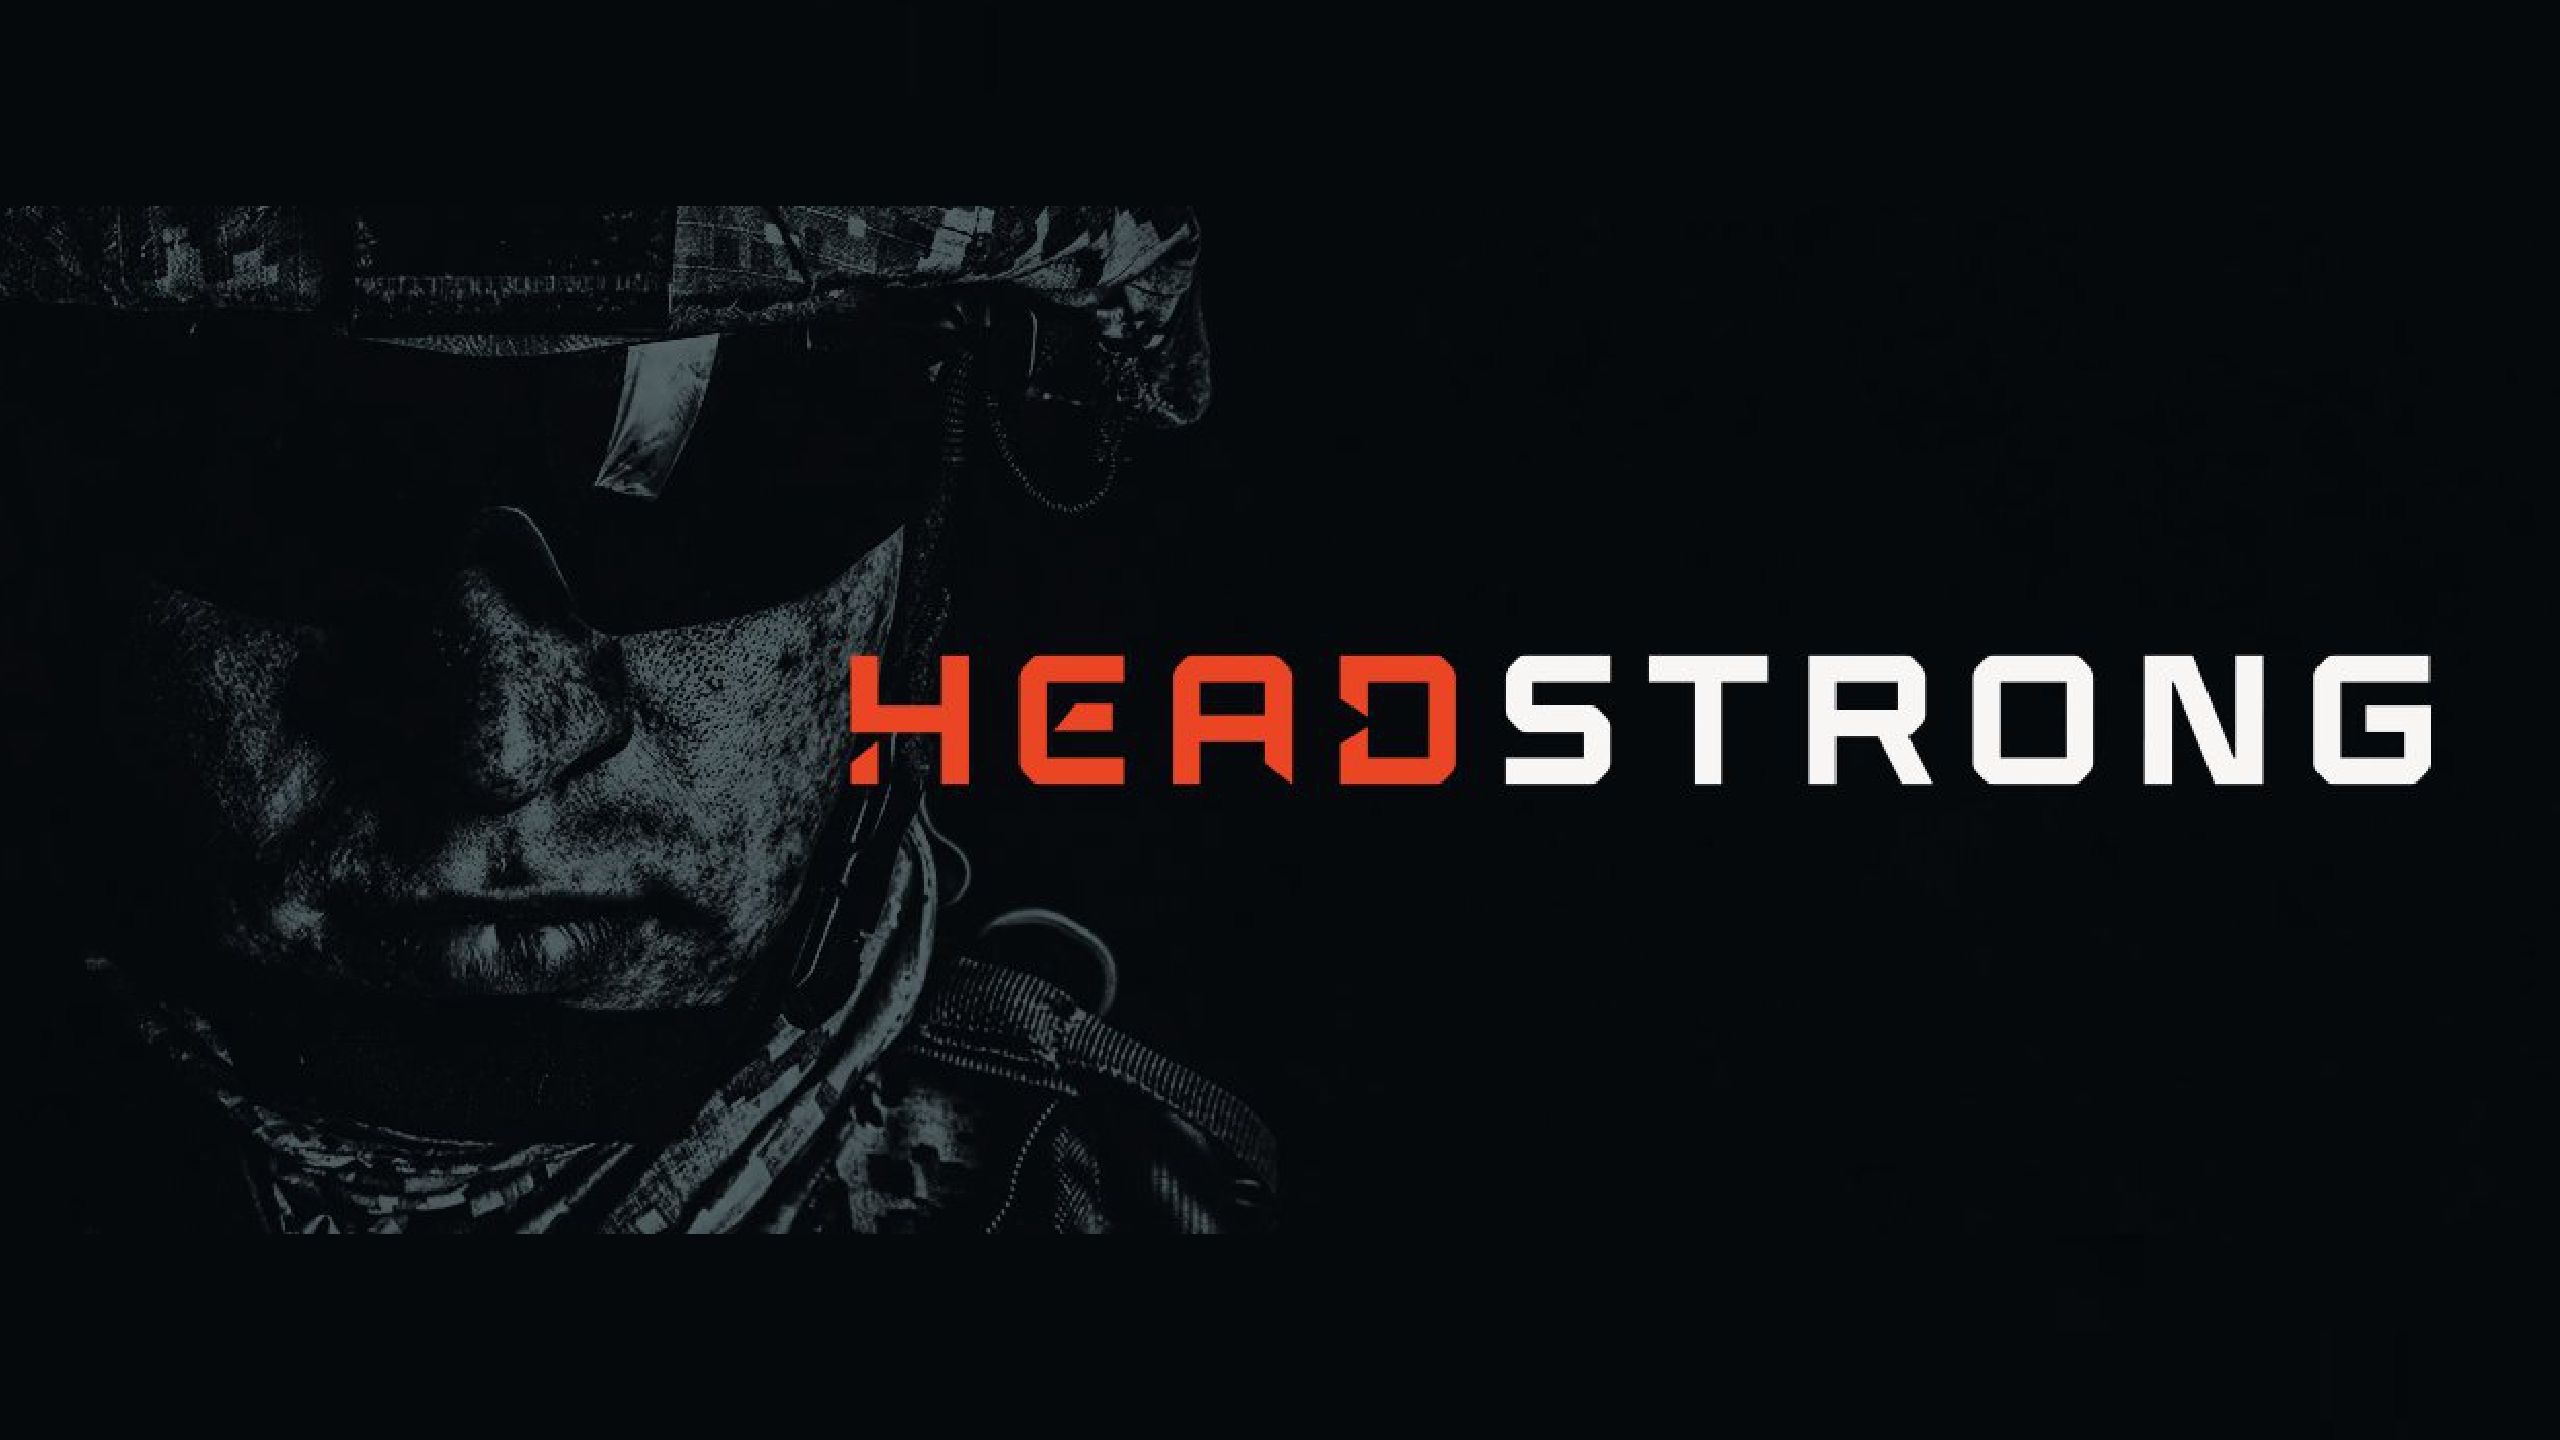 Headstrong aims to help Vets with 8 categories of mental health